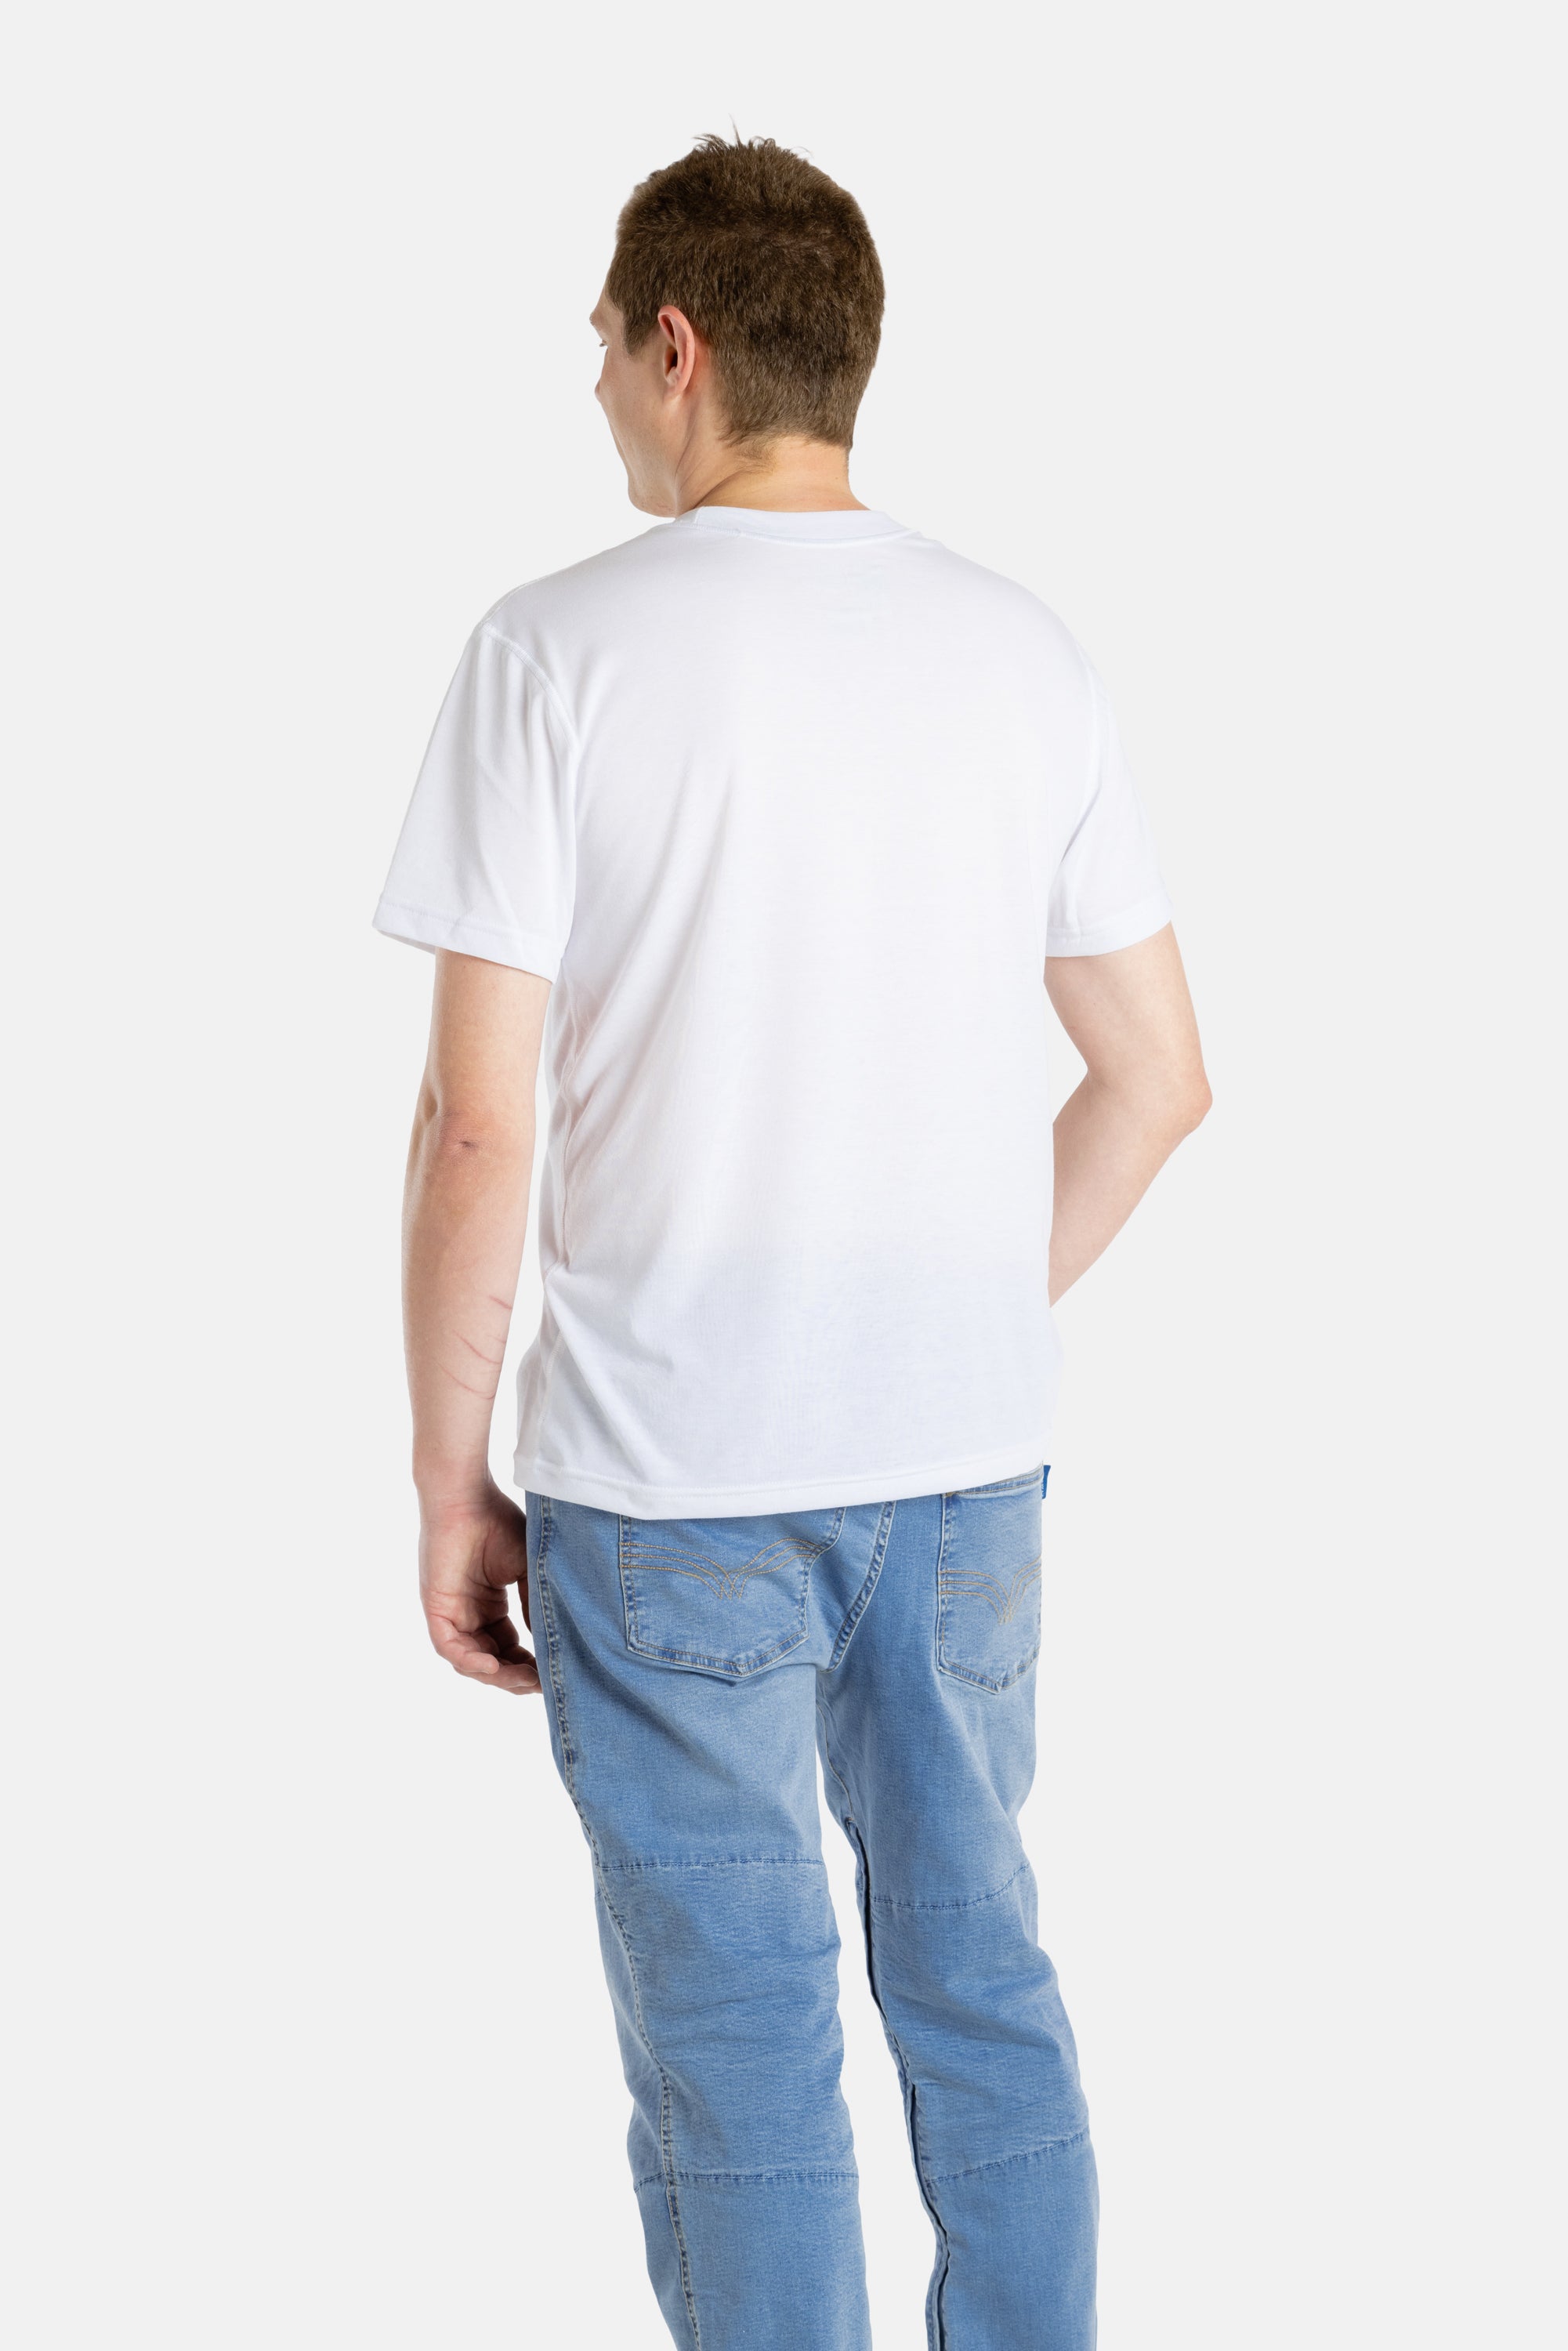 The back of a white man with short brown hair wearing a white t-shirt.